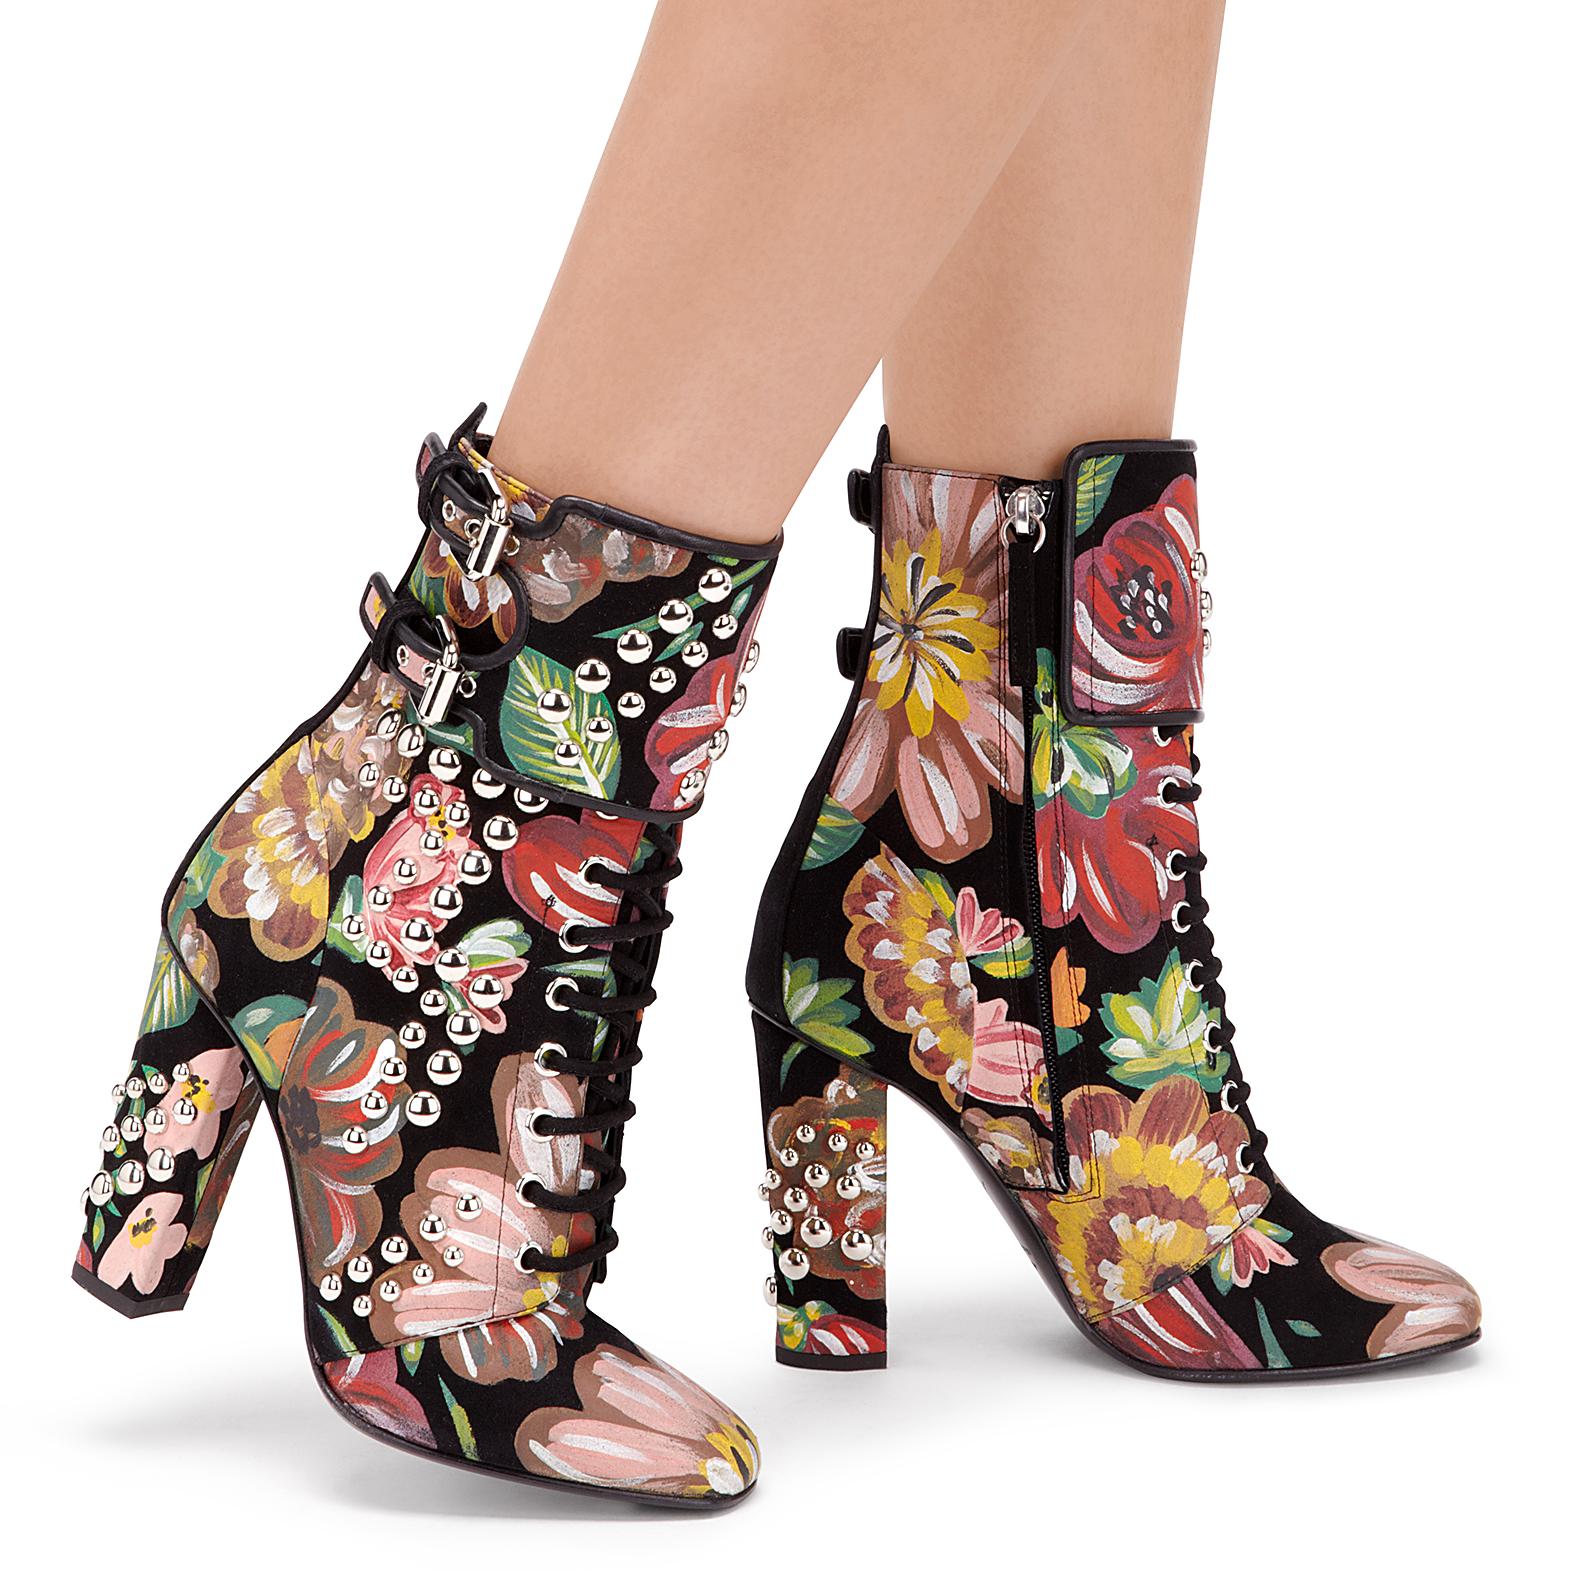 Giuseppe Zanotti NEW Hand Painted Floral Leather Chunky Block Heel Boots in Box

Size IT 40
Leather
Gold tone hardware
Zip and buckle closures
Made in Italy
Heel height 4